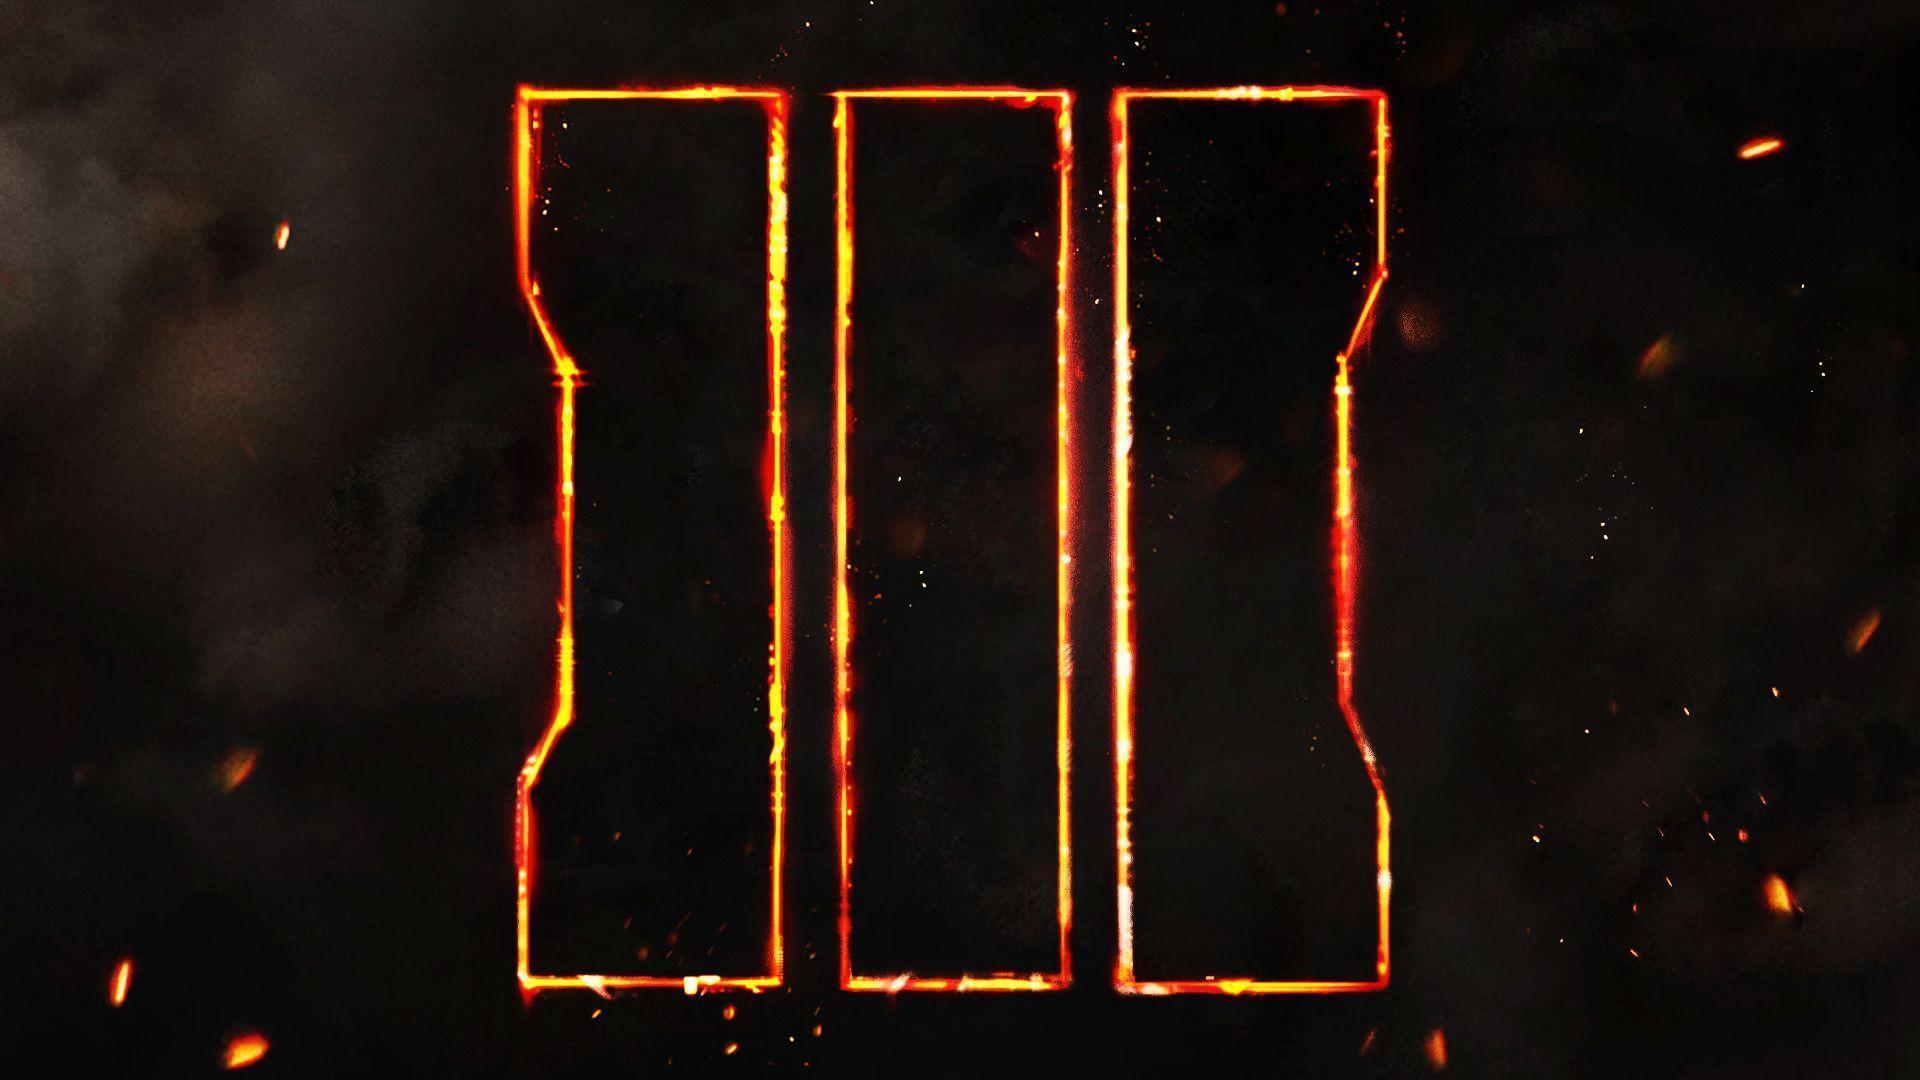 Black Ops 3 Wallpaper (BO3) Download Call of Duty